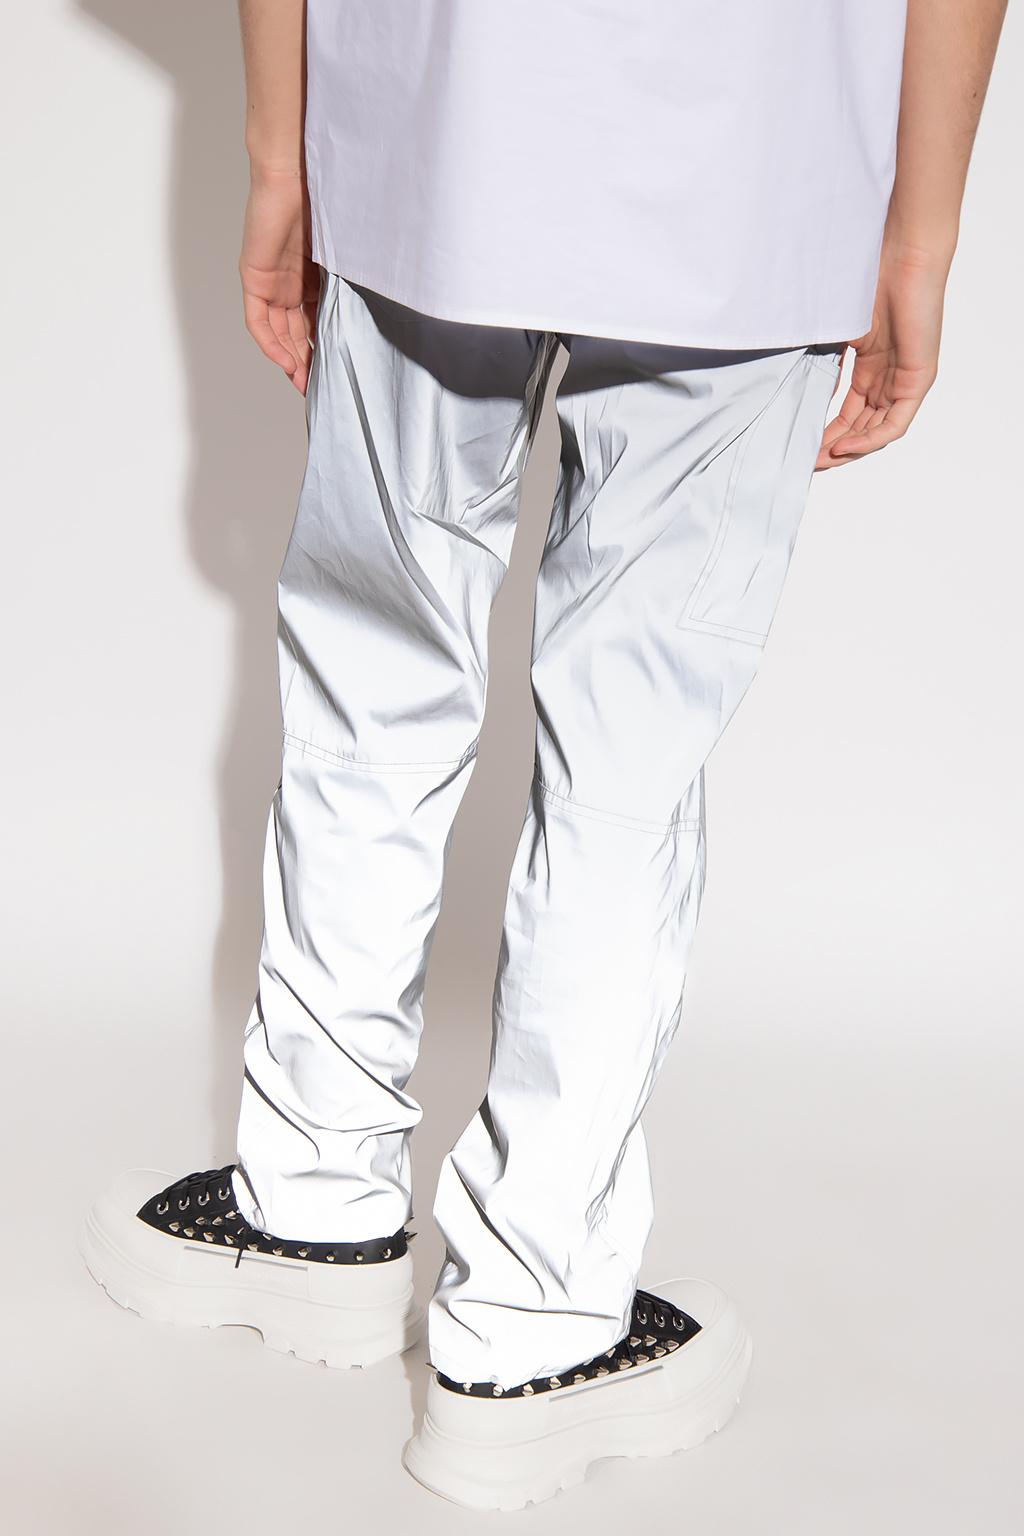 Helmut Lang Reflective Trousers in Gray for Men